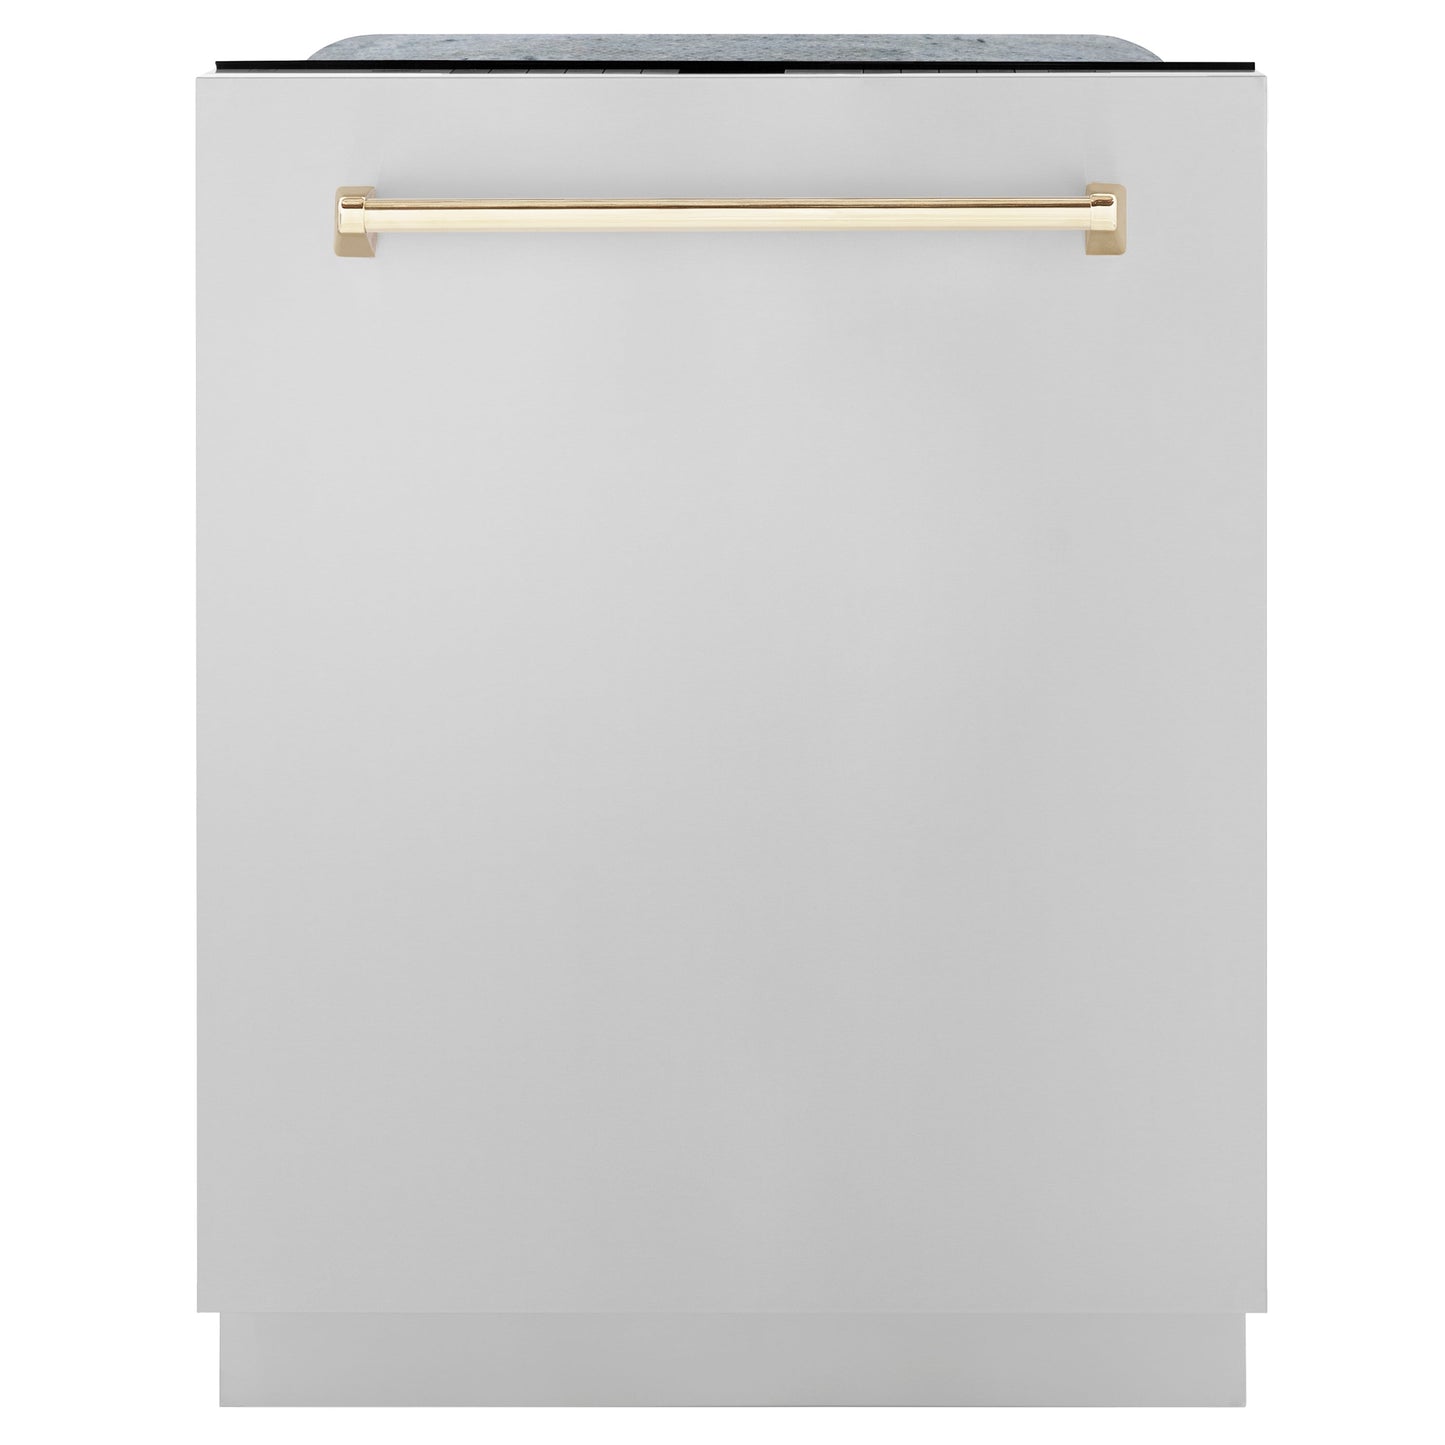 ZLINE Autograph Edition 24" 3rd Rack Top Touch Control Tall Tub Stainless Steel Dishwasher with Gold Handle